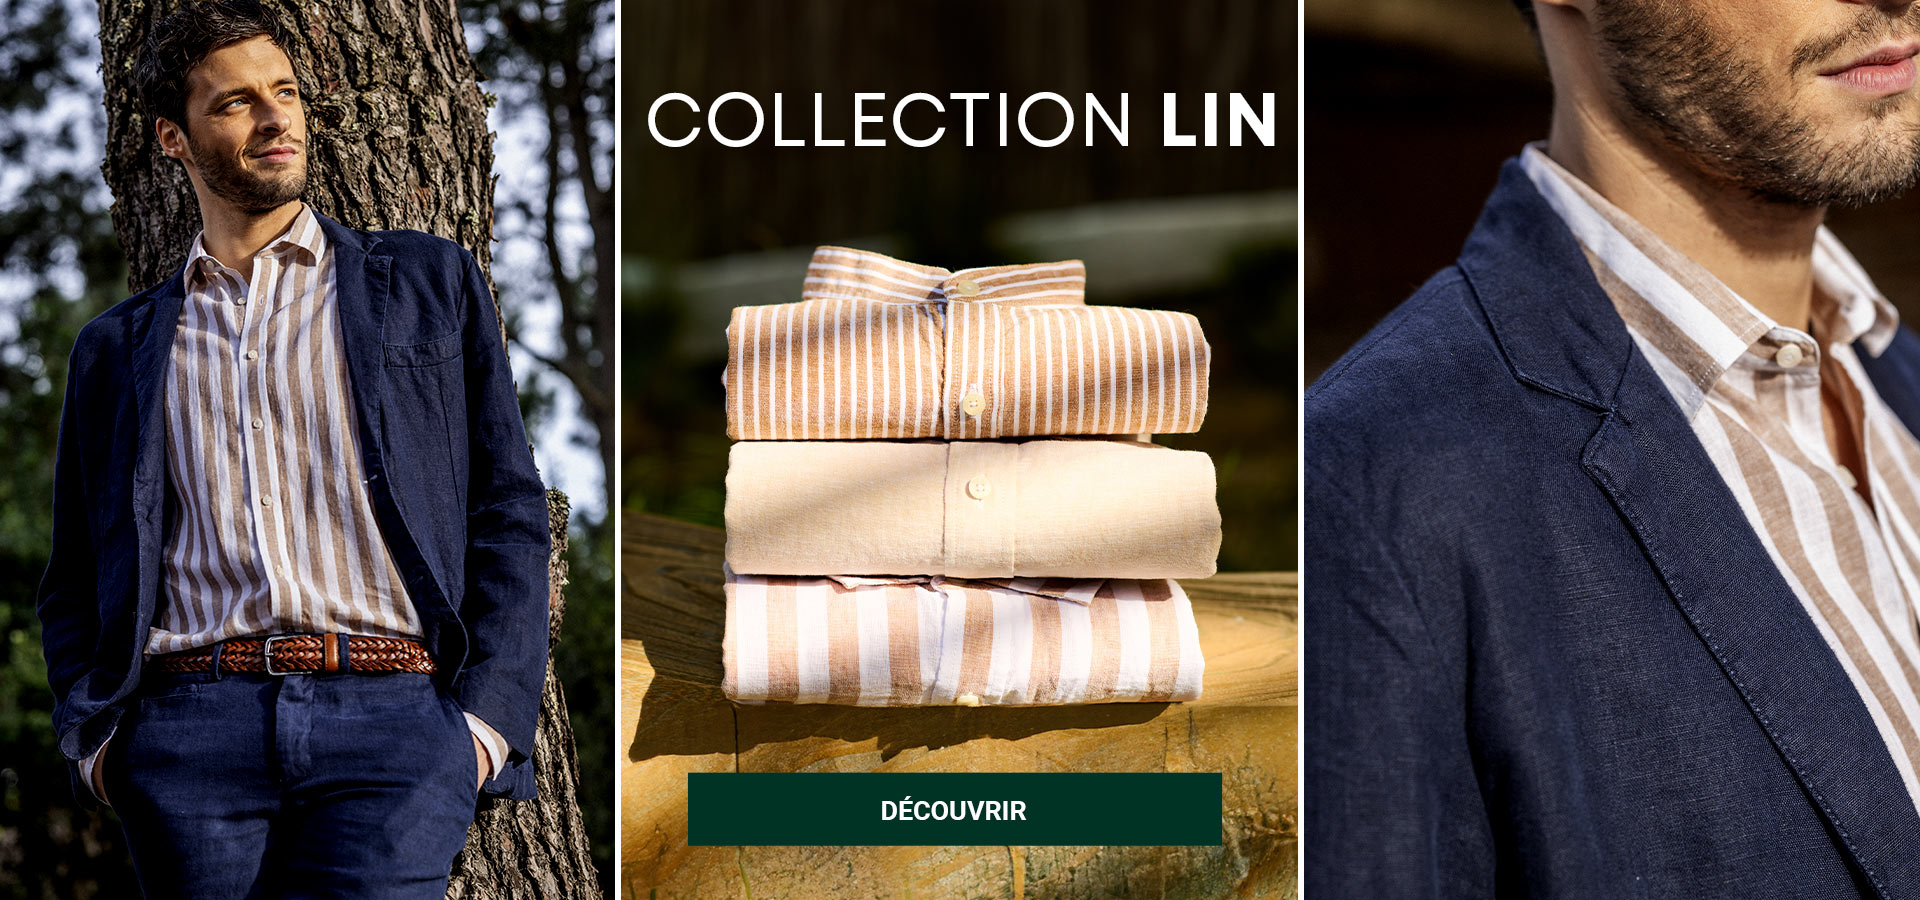 Selection lin homme bexley